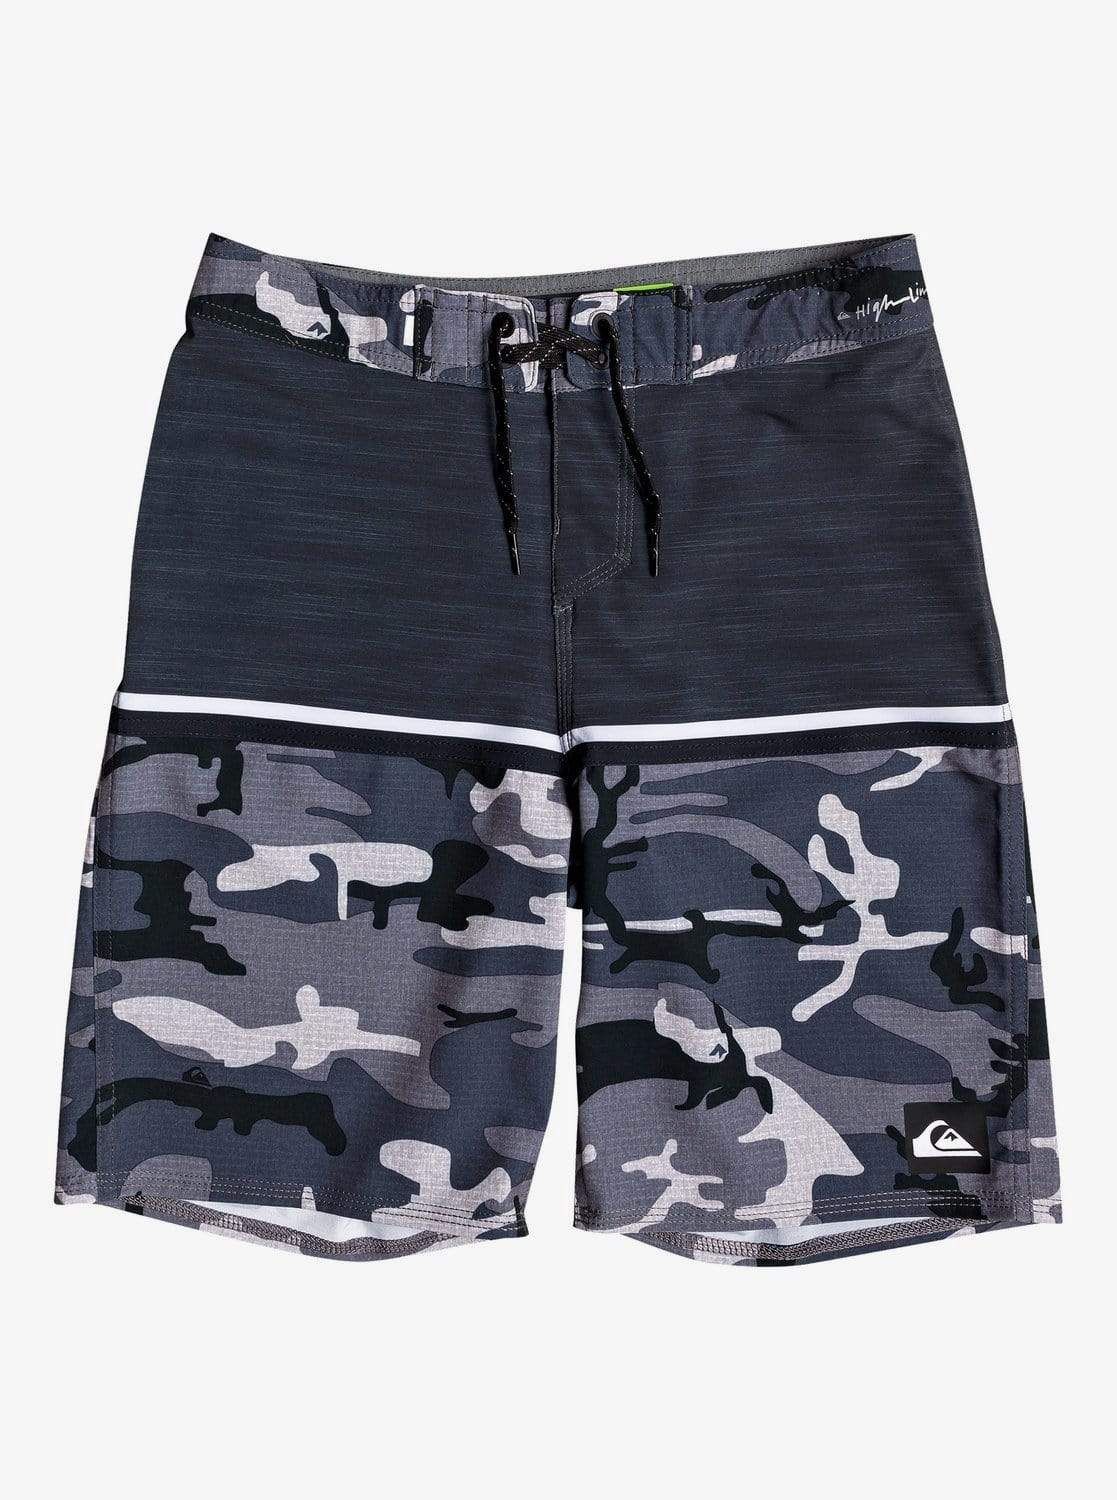 Quik Silver Mens sports 29/ X-Small Highline Division Boardshorts